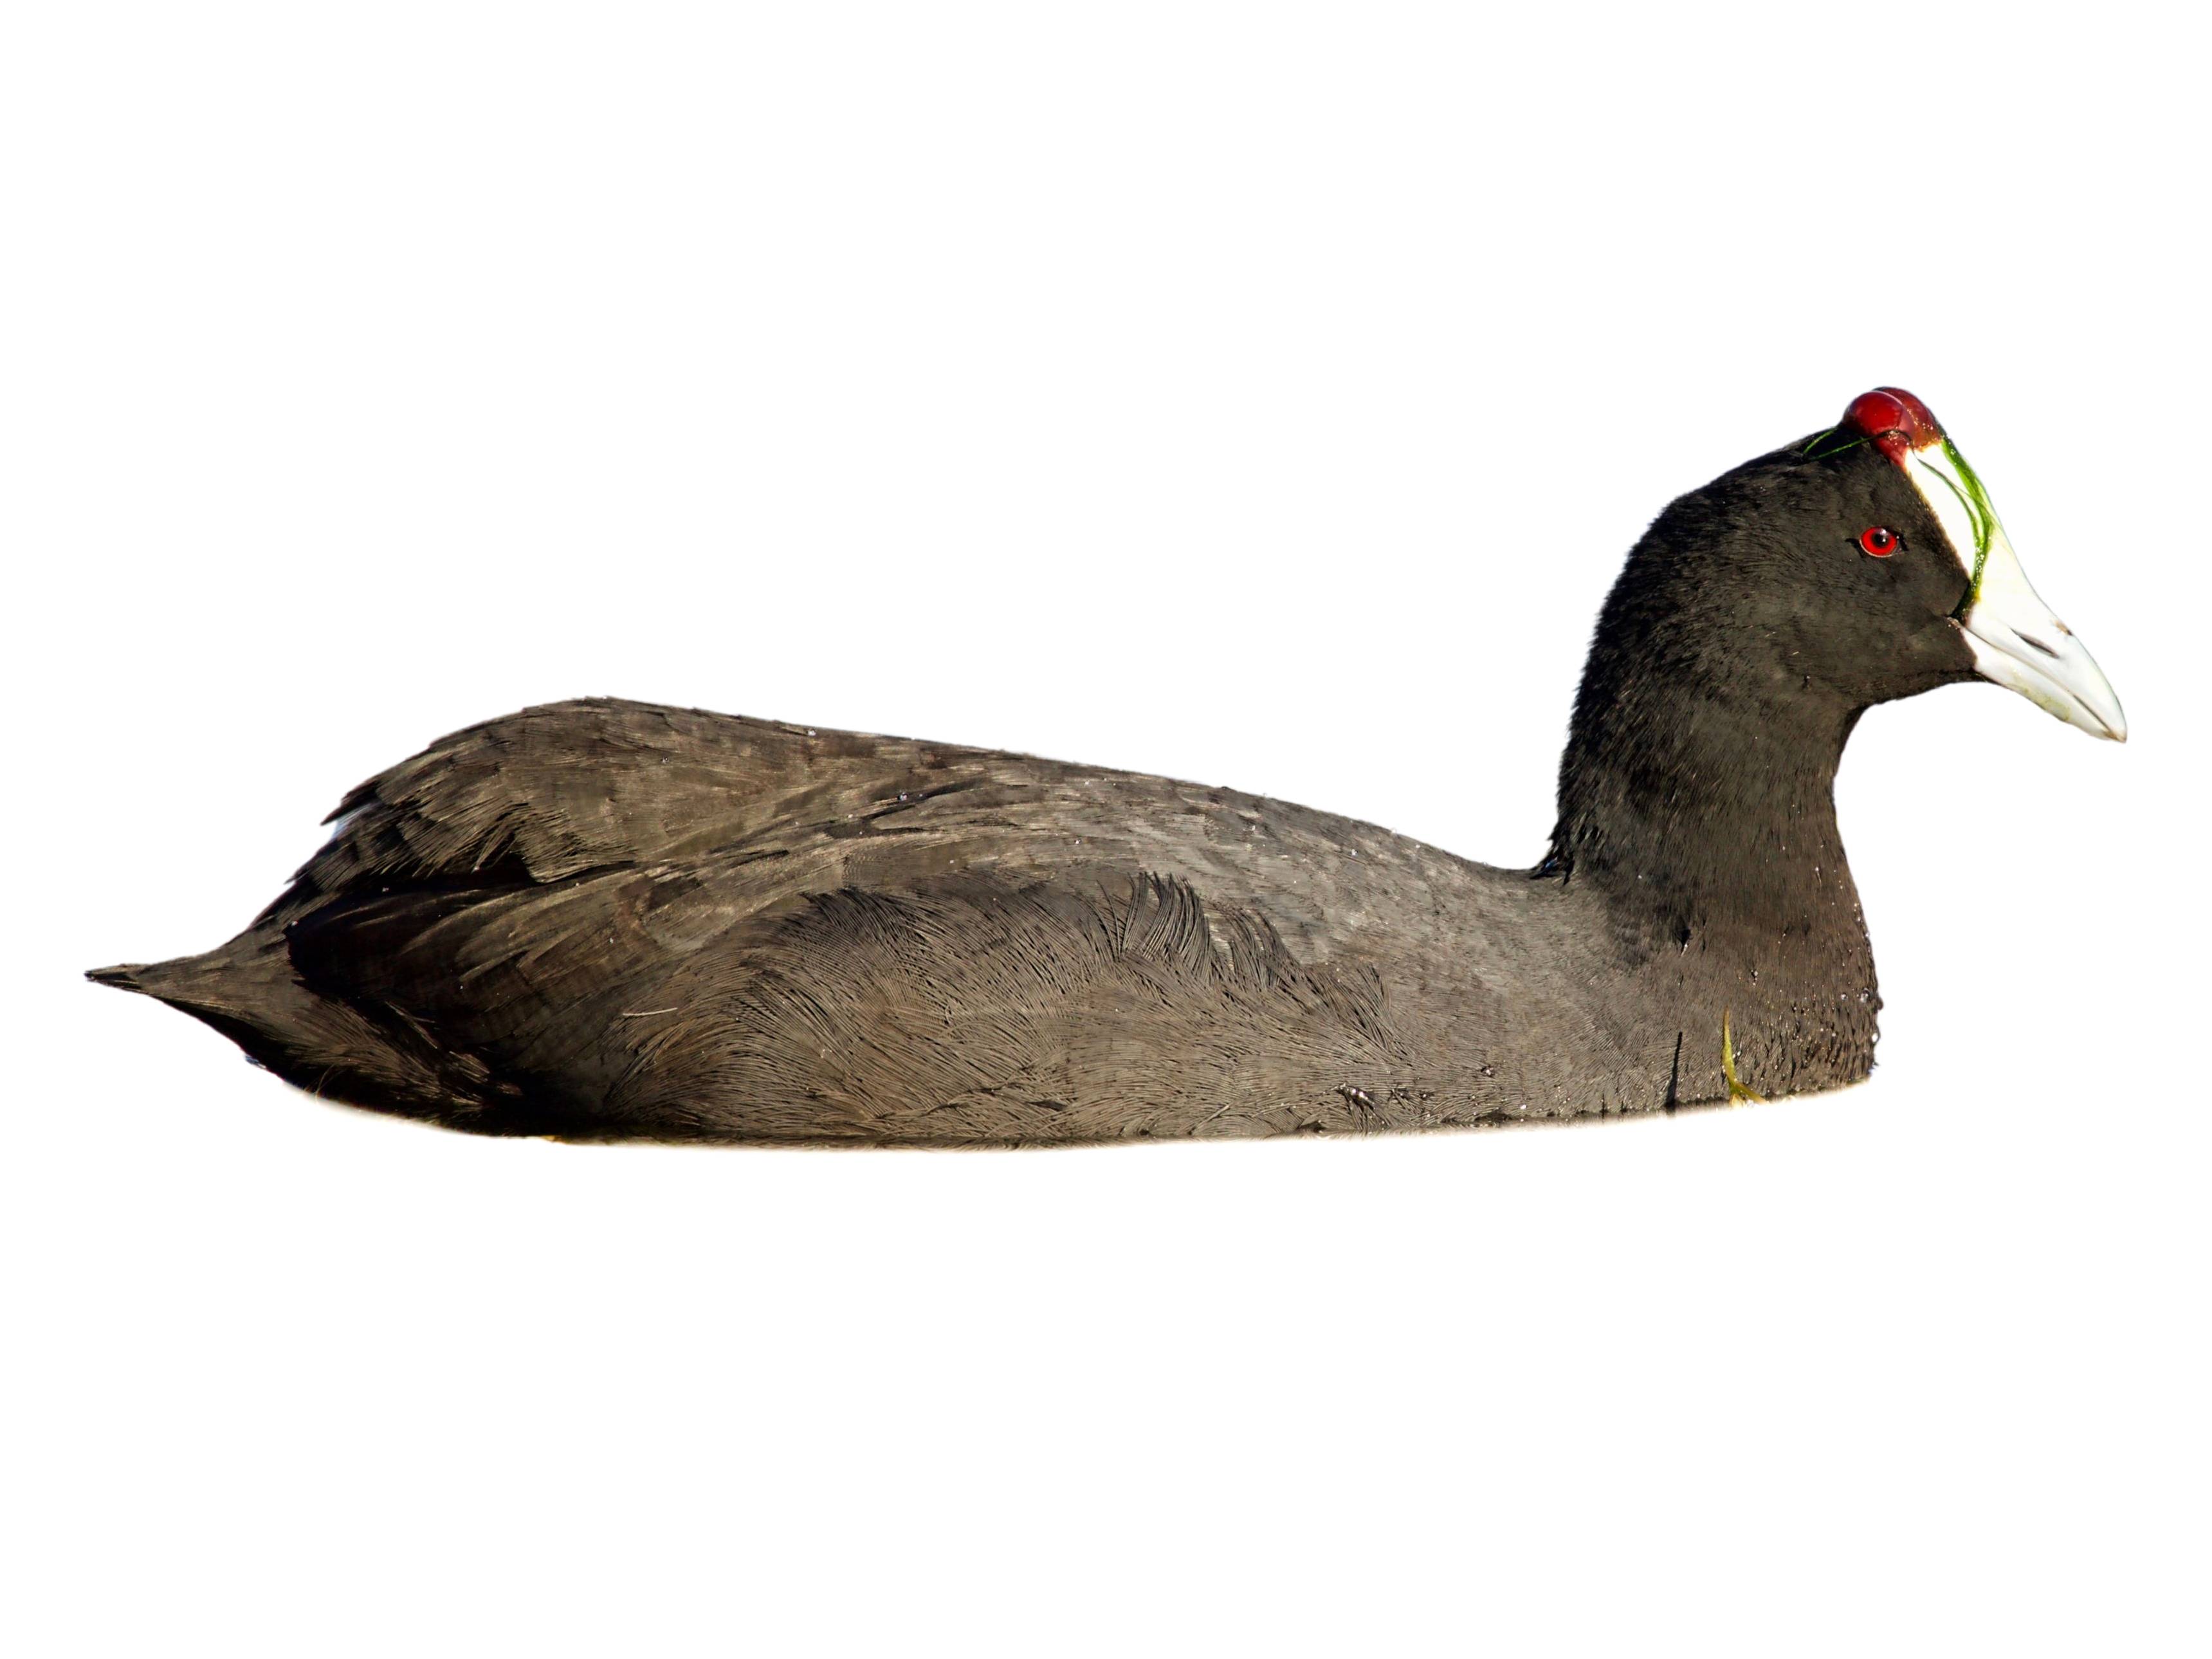 A photo of a Red-knobbed Coot (Fulica cristata)